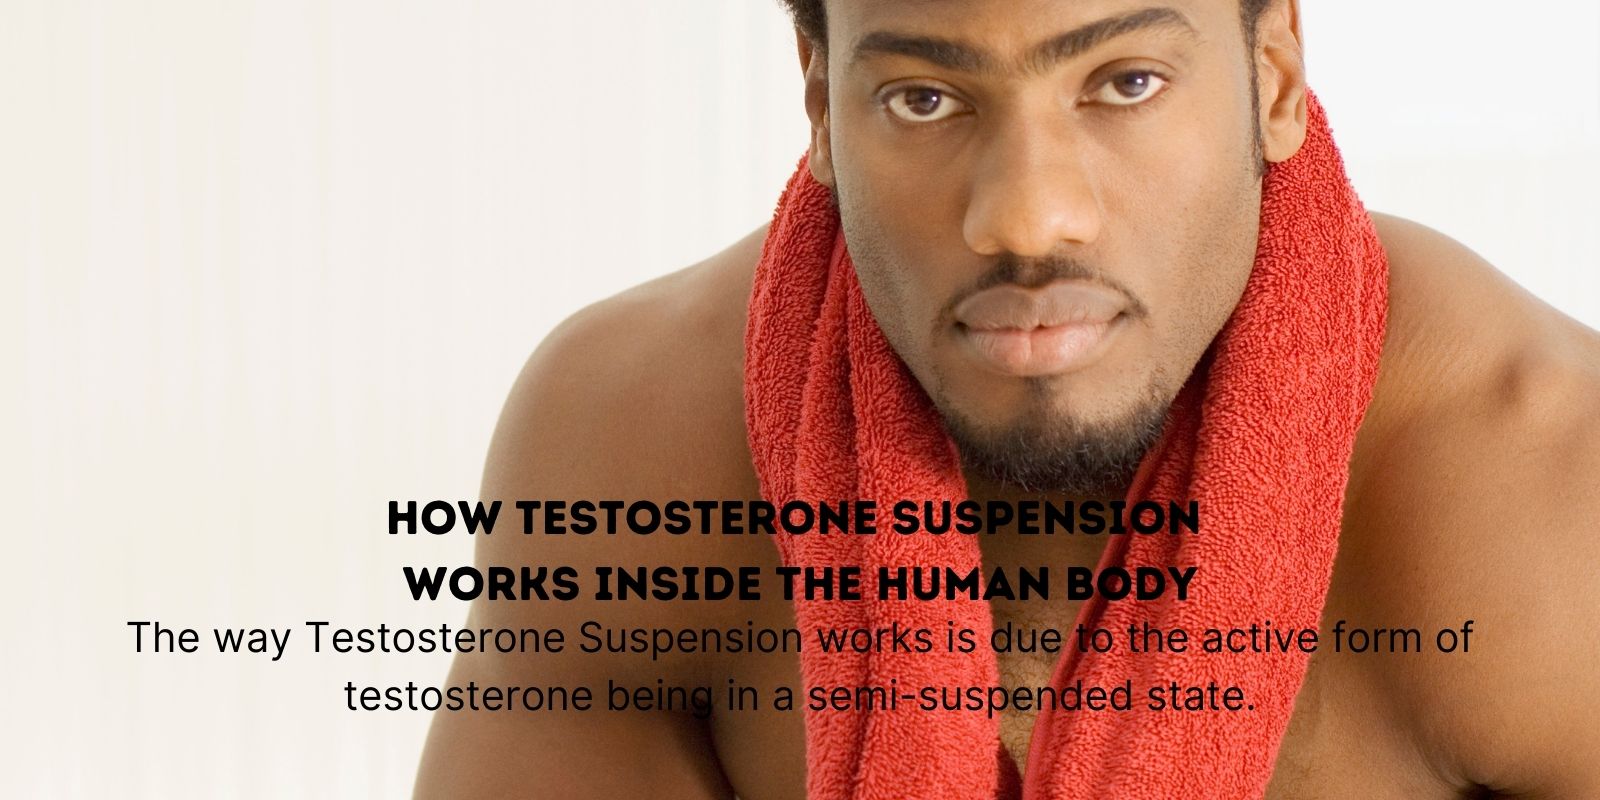 How Testosterone Suspension works inside the human body